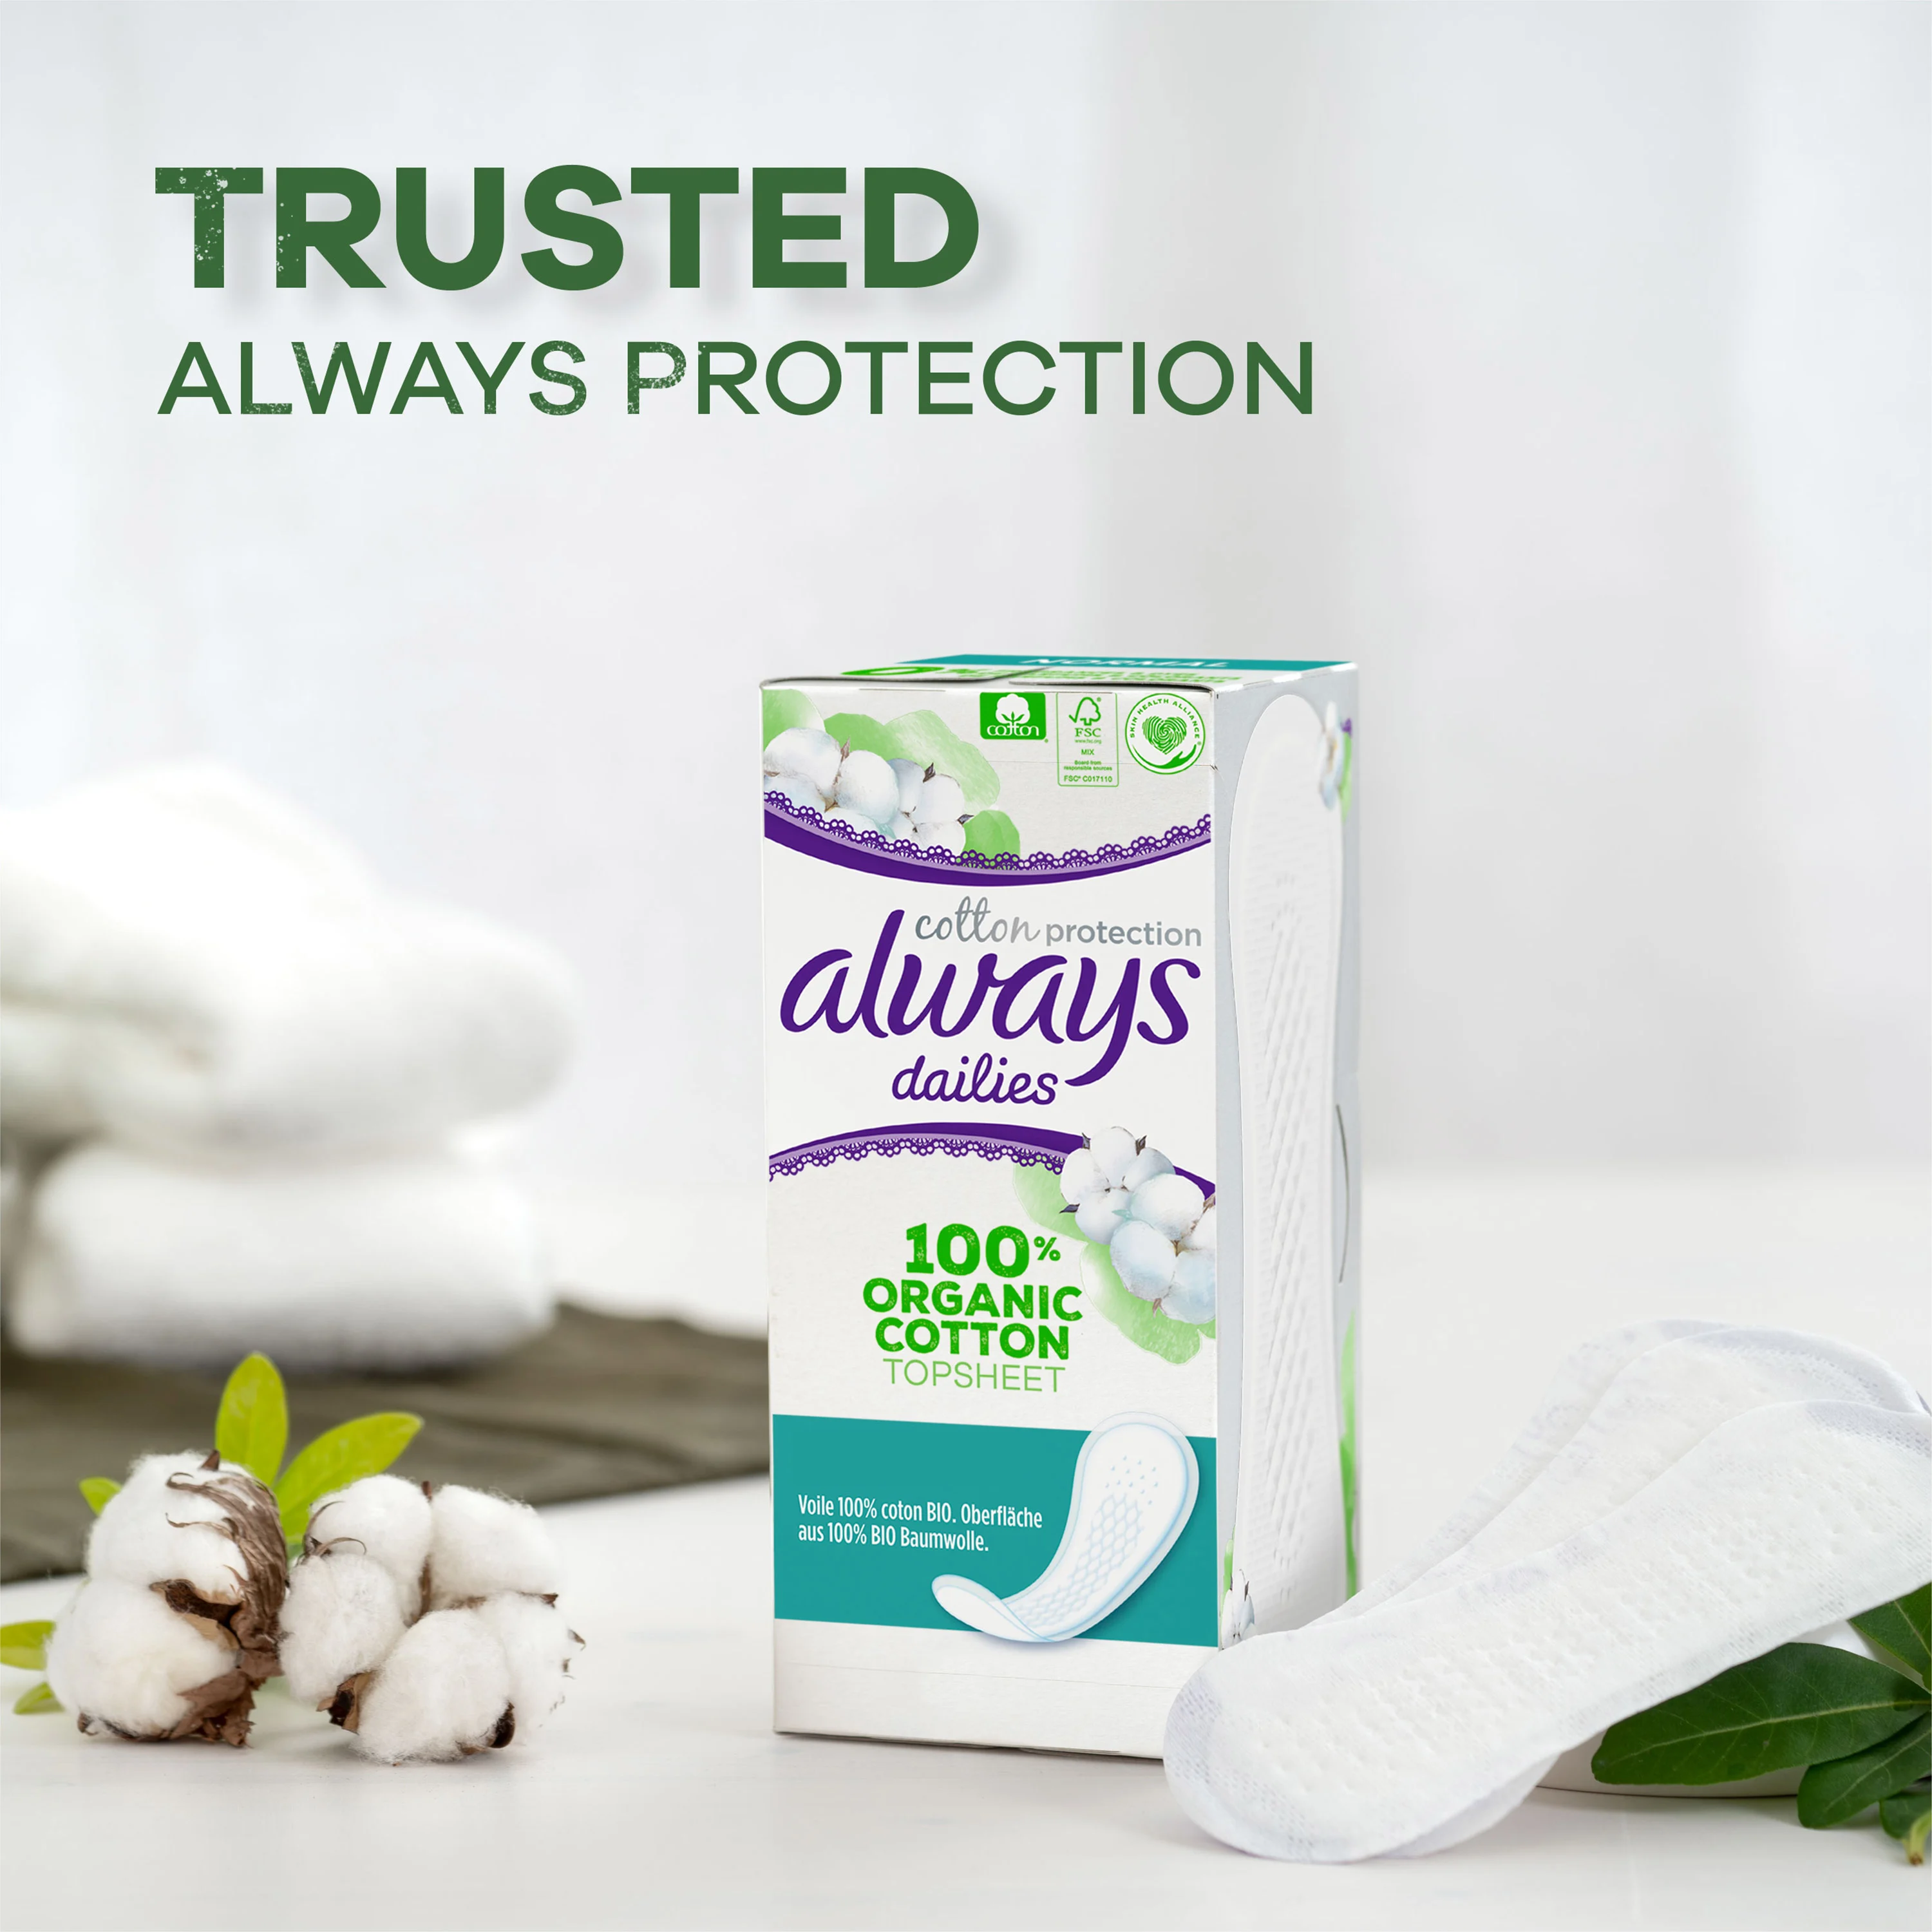 Always Dailies Cotton Protection pantyliners trusted protection with a 100% organic cotton topsheet